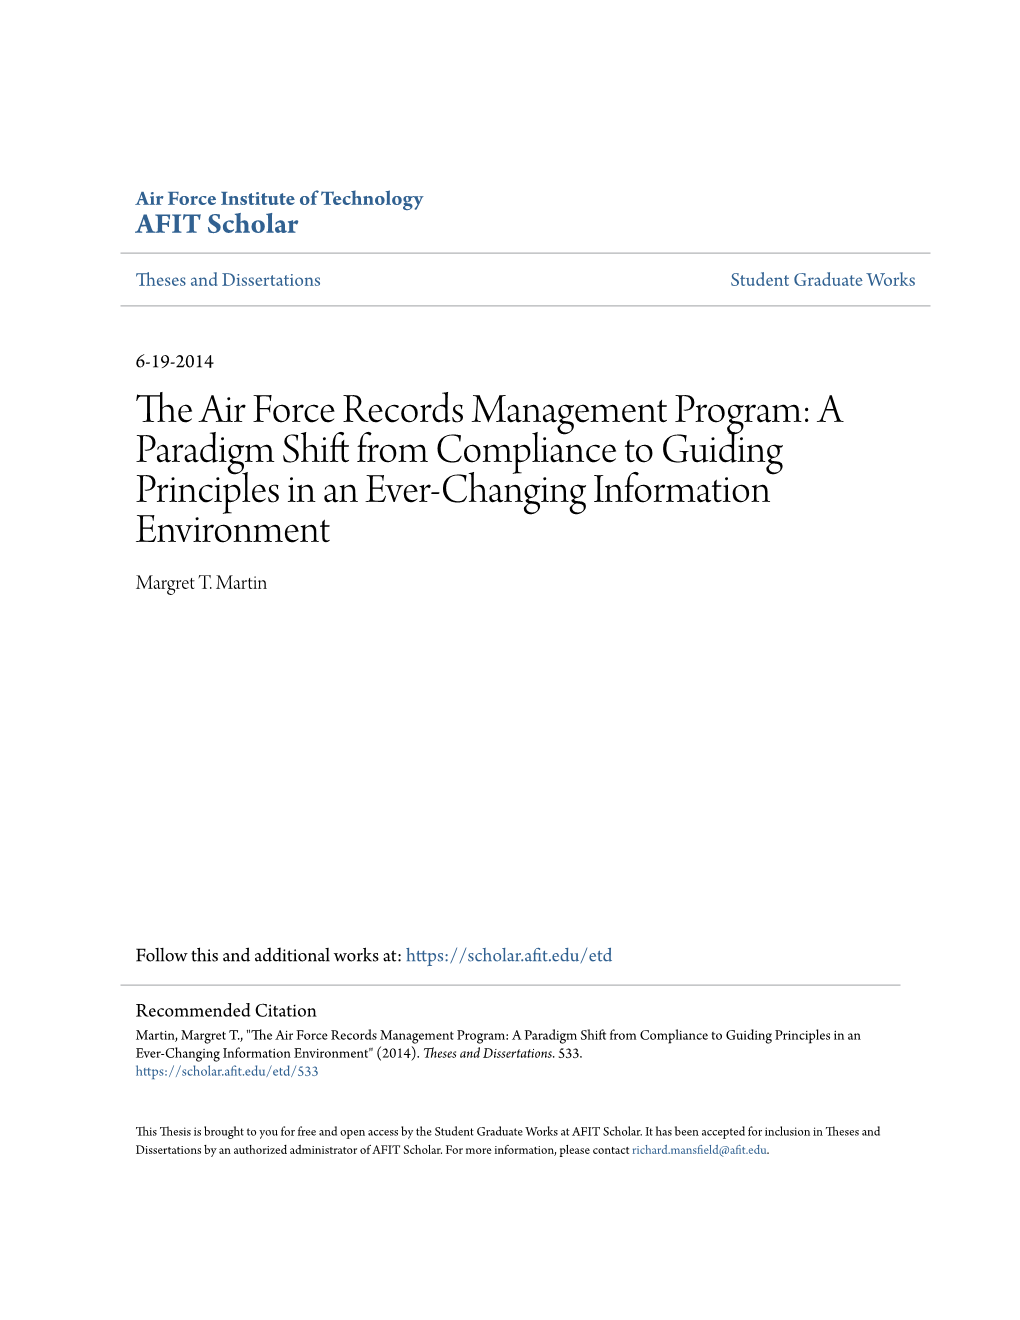 The Air Force Records Management Program: a Paradigm Shift from Compliance to Guiding Principles in an Ever-Changing Information Environment Margret T